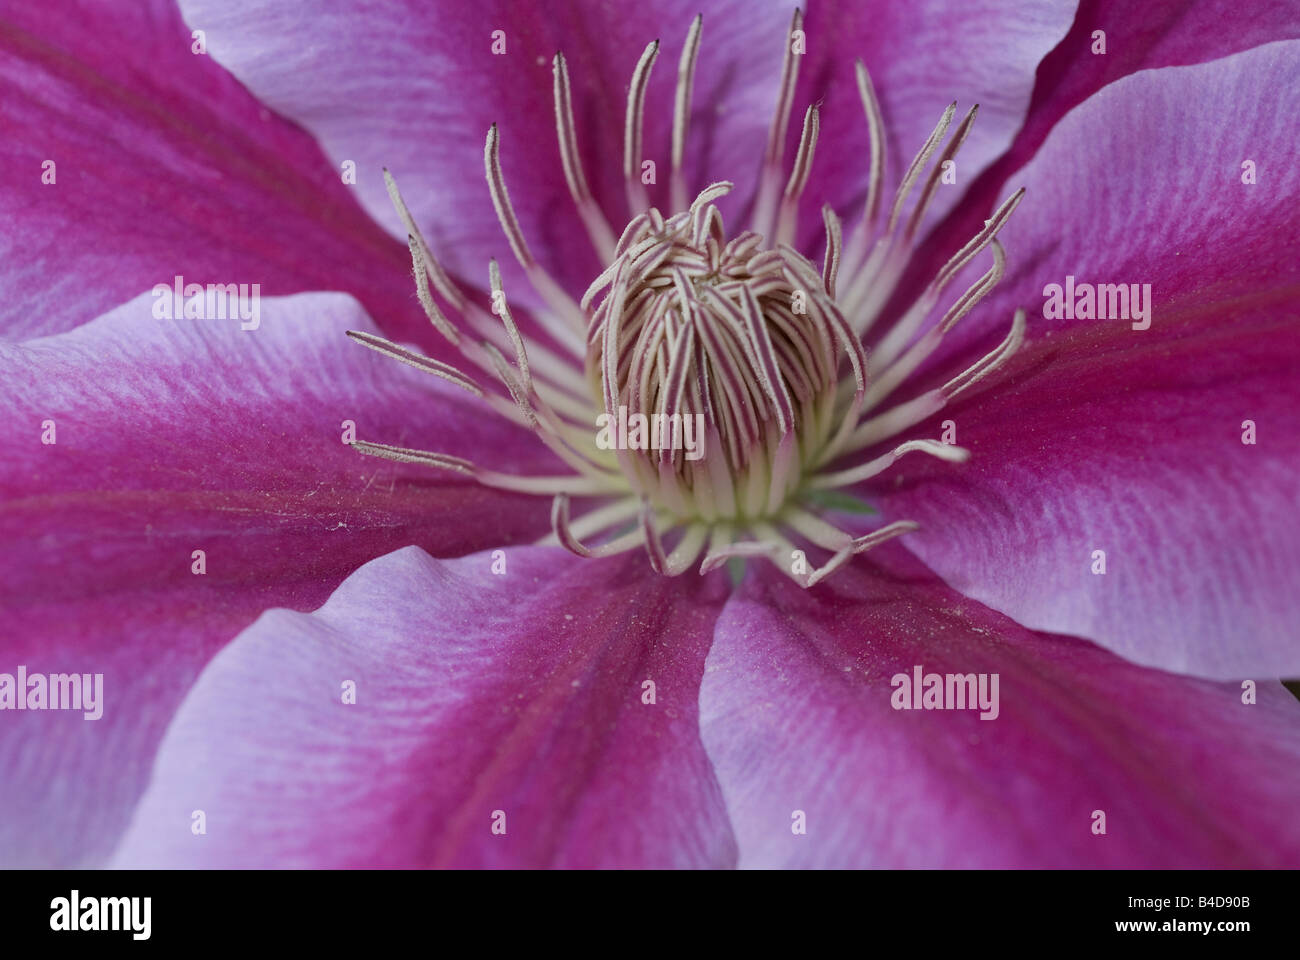 A close up of the center of a purple clematis flower Stock Photo